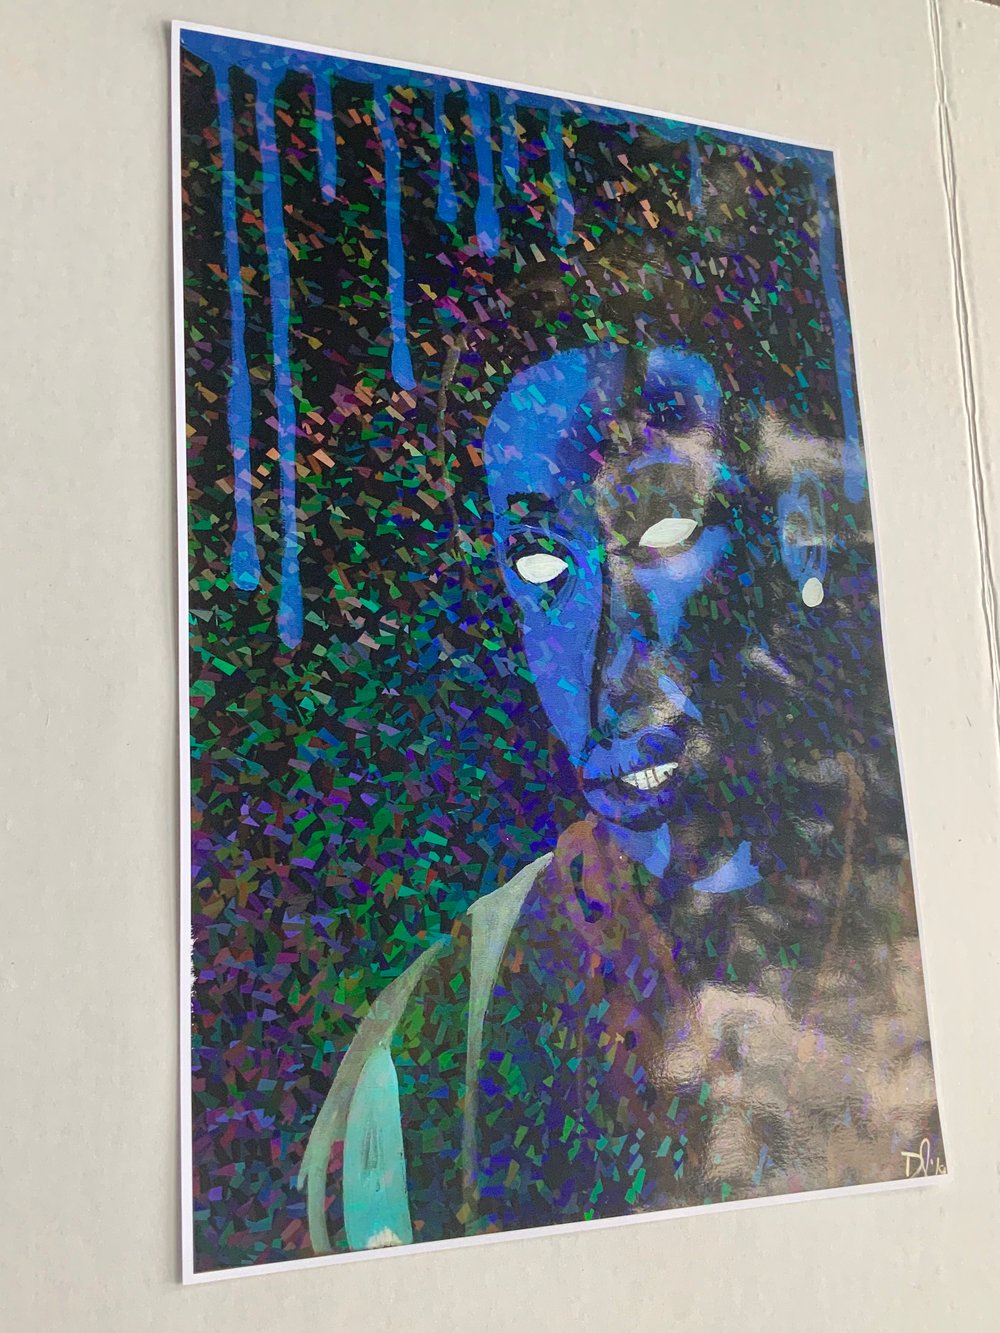 Image of Sicko Mode Holographic Print